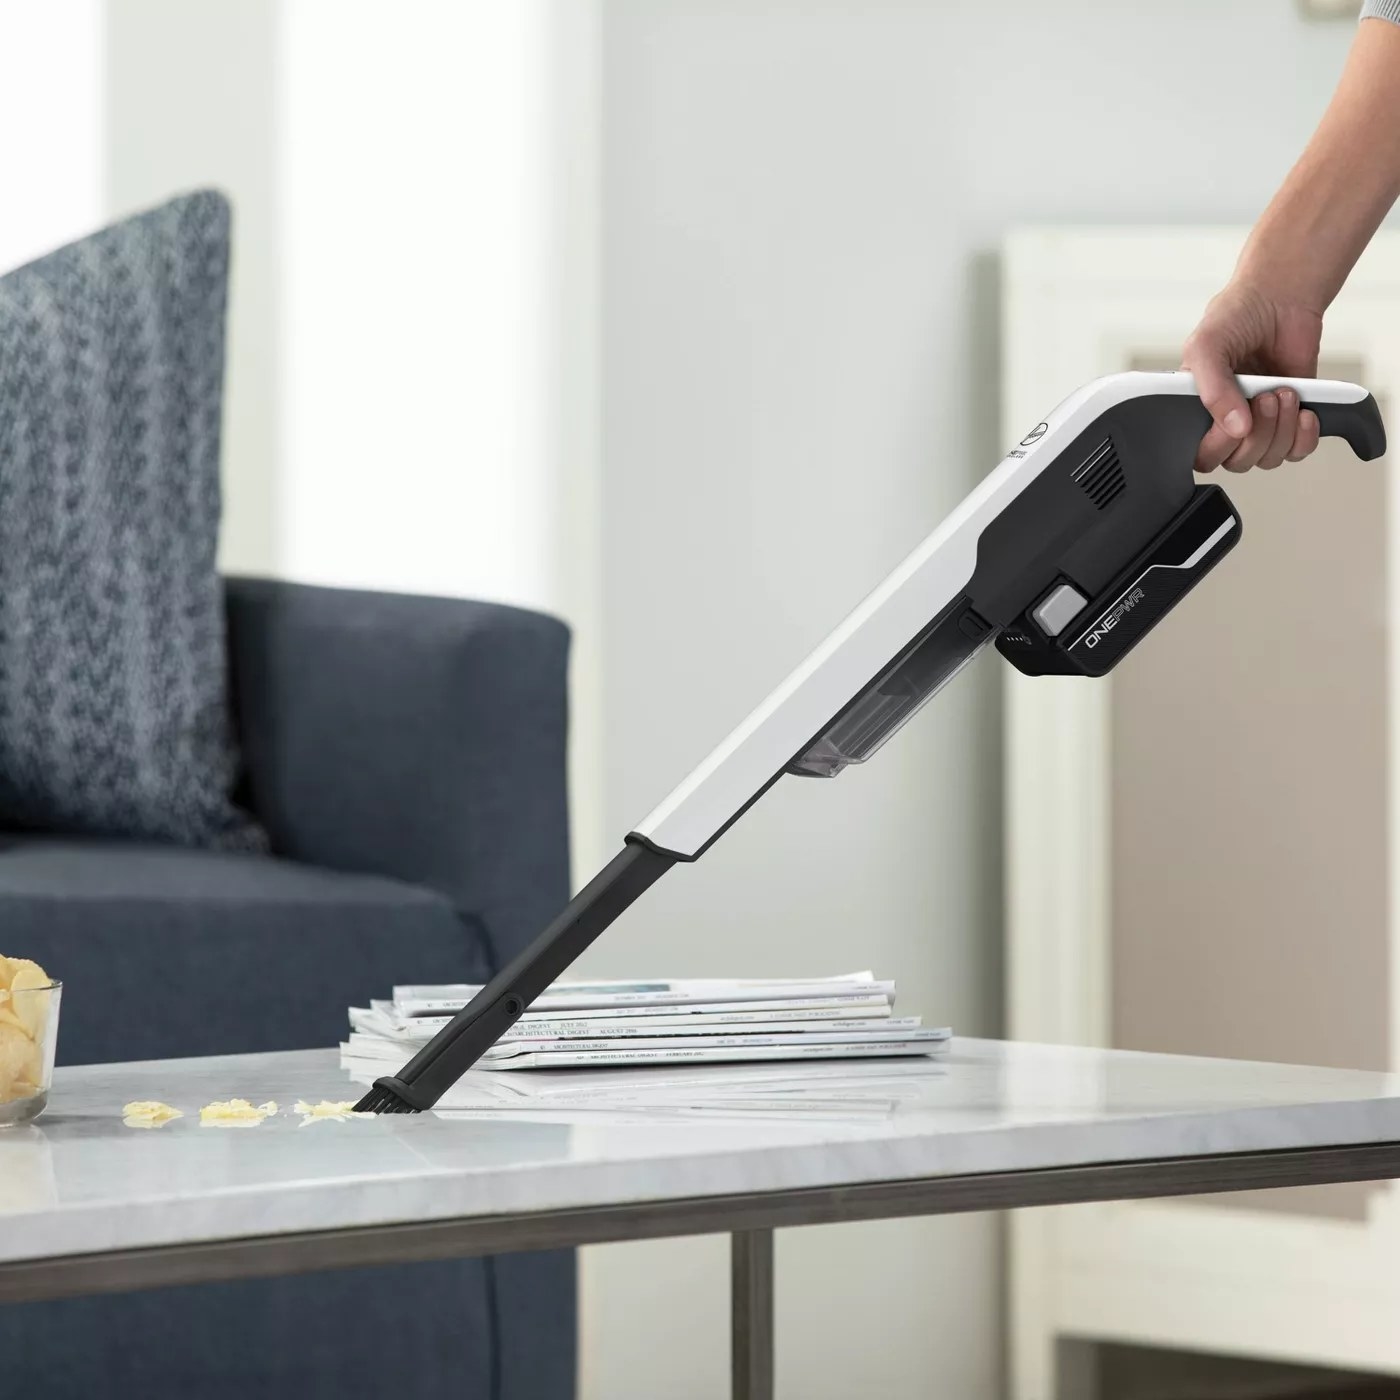 The ONEPWR Hoover handheld vacuum